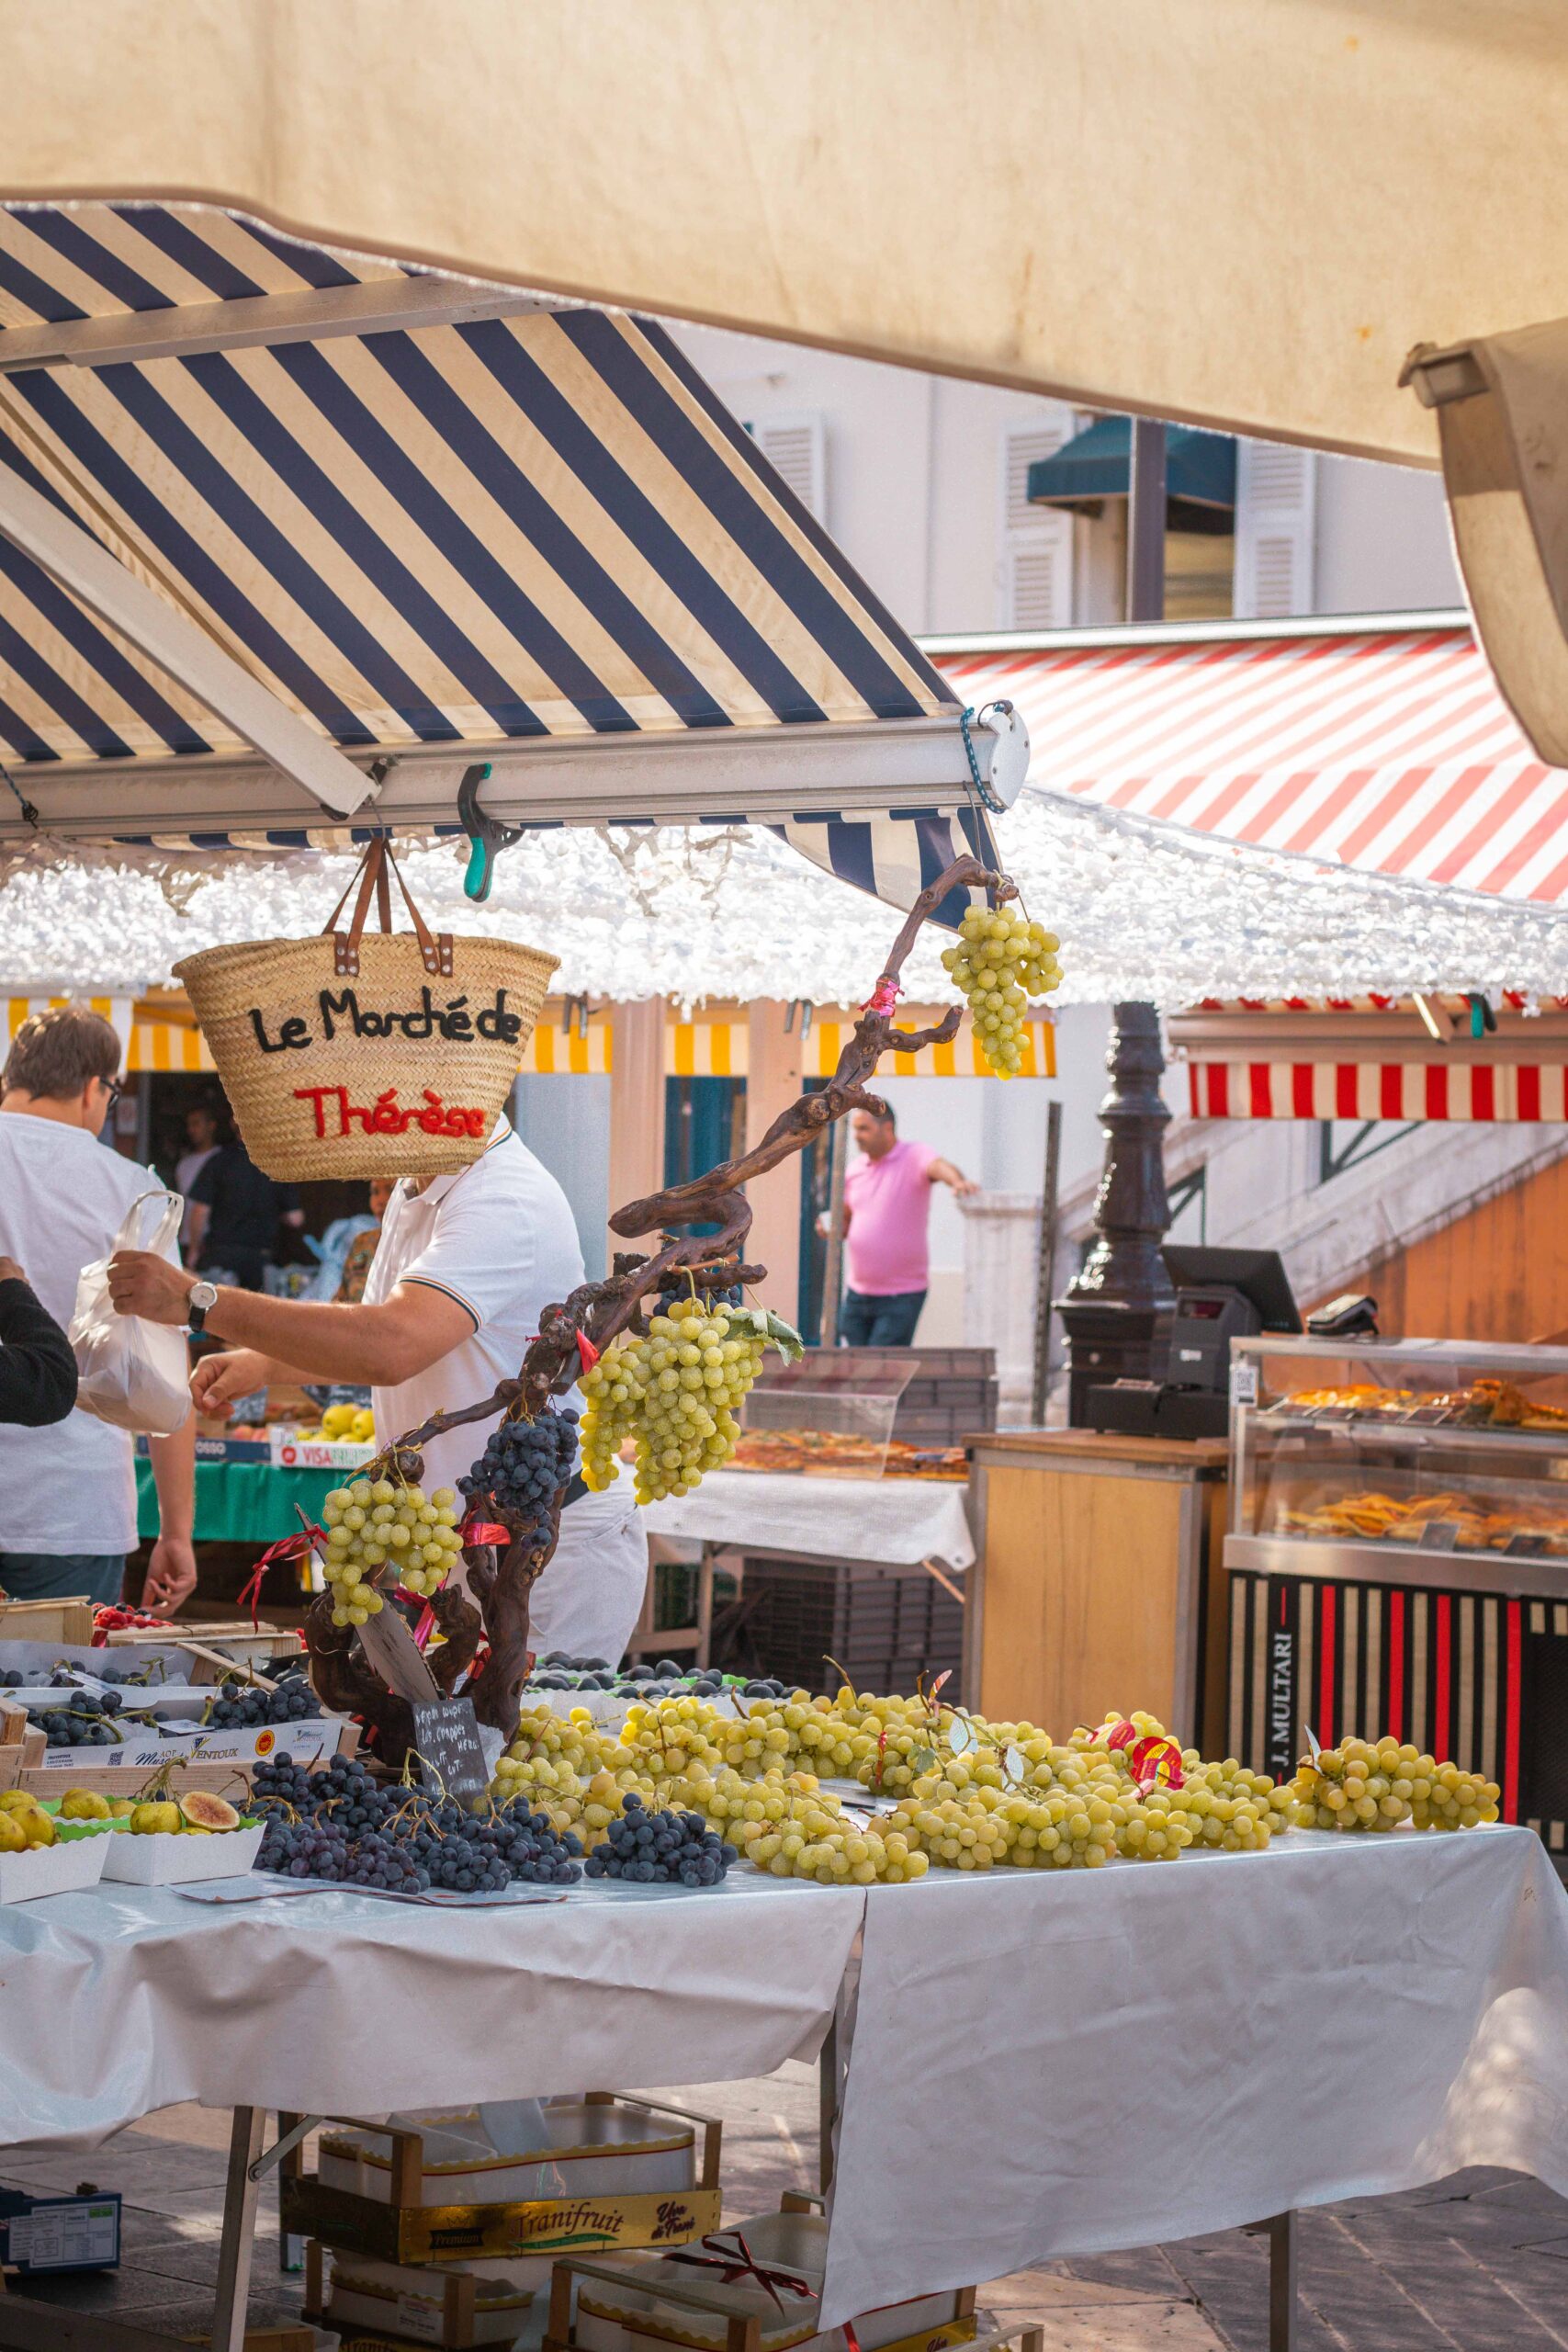 Market stall selling grapes and fruits at the Marché Aux Fleurs Cours Saleya in Nice, France